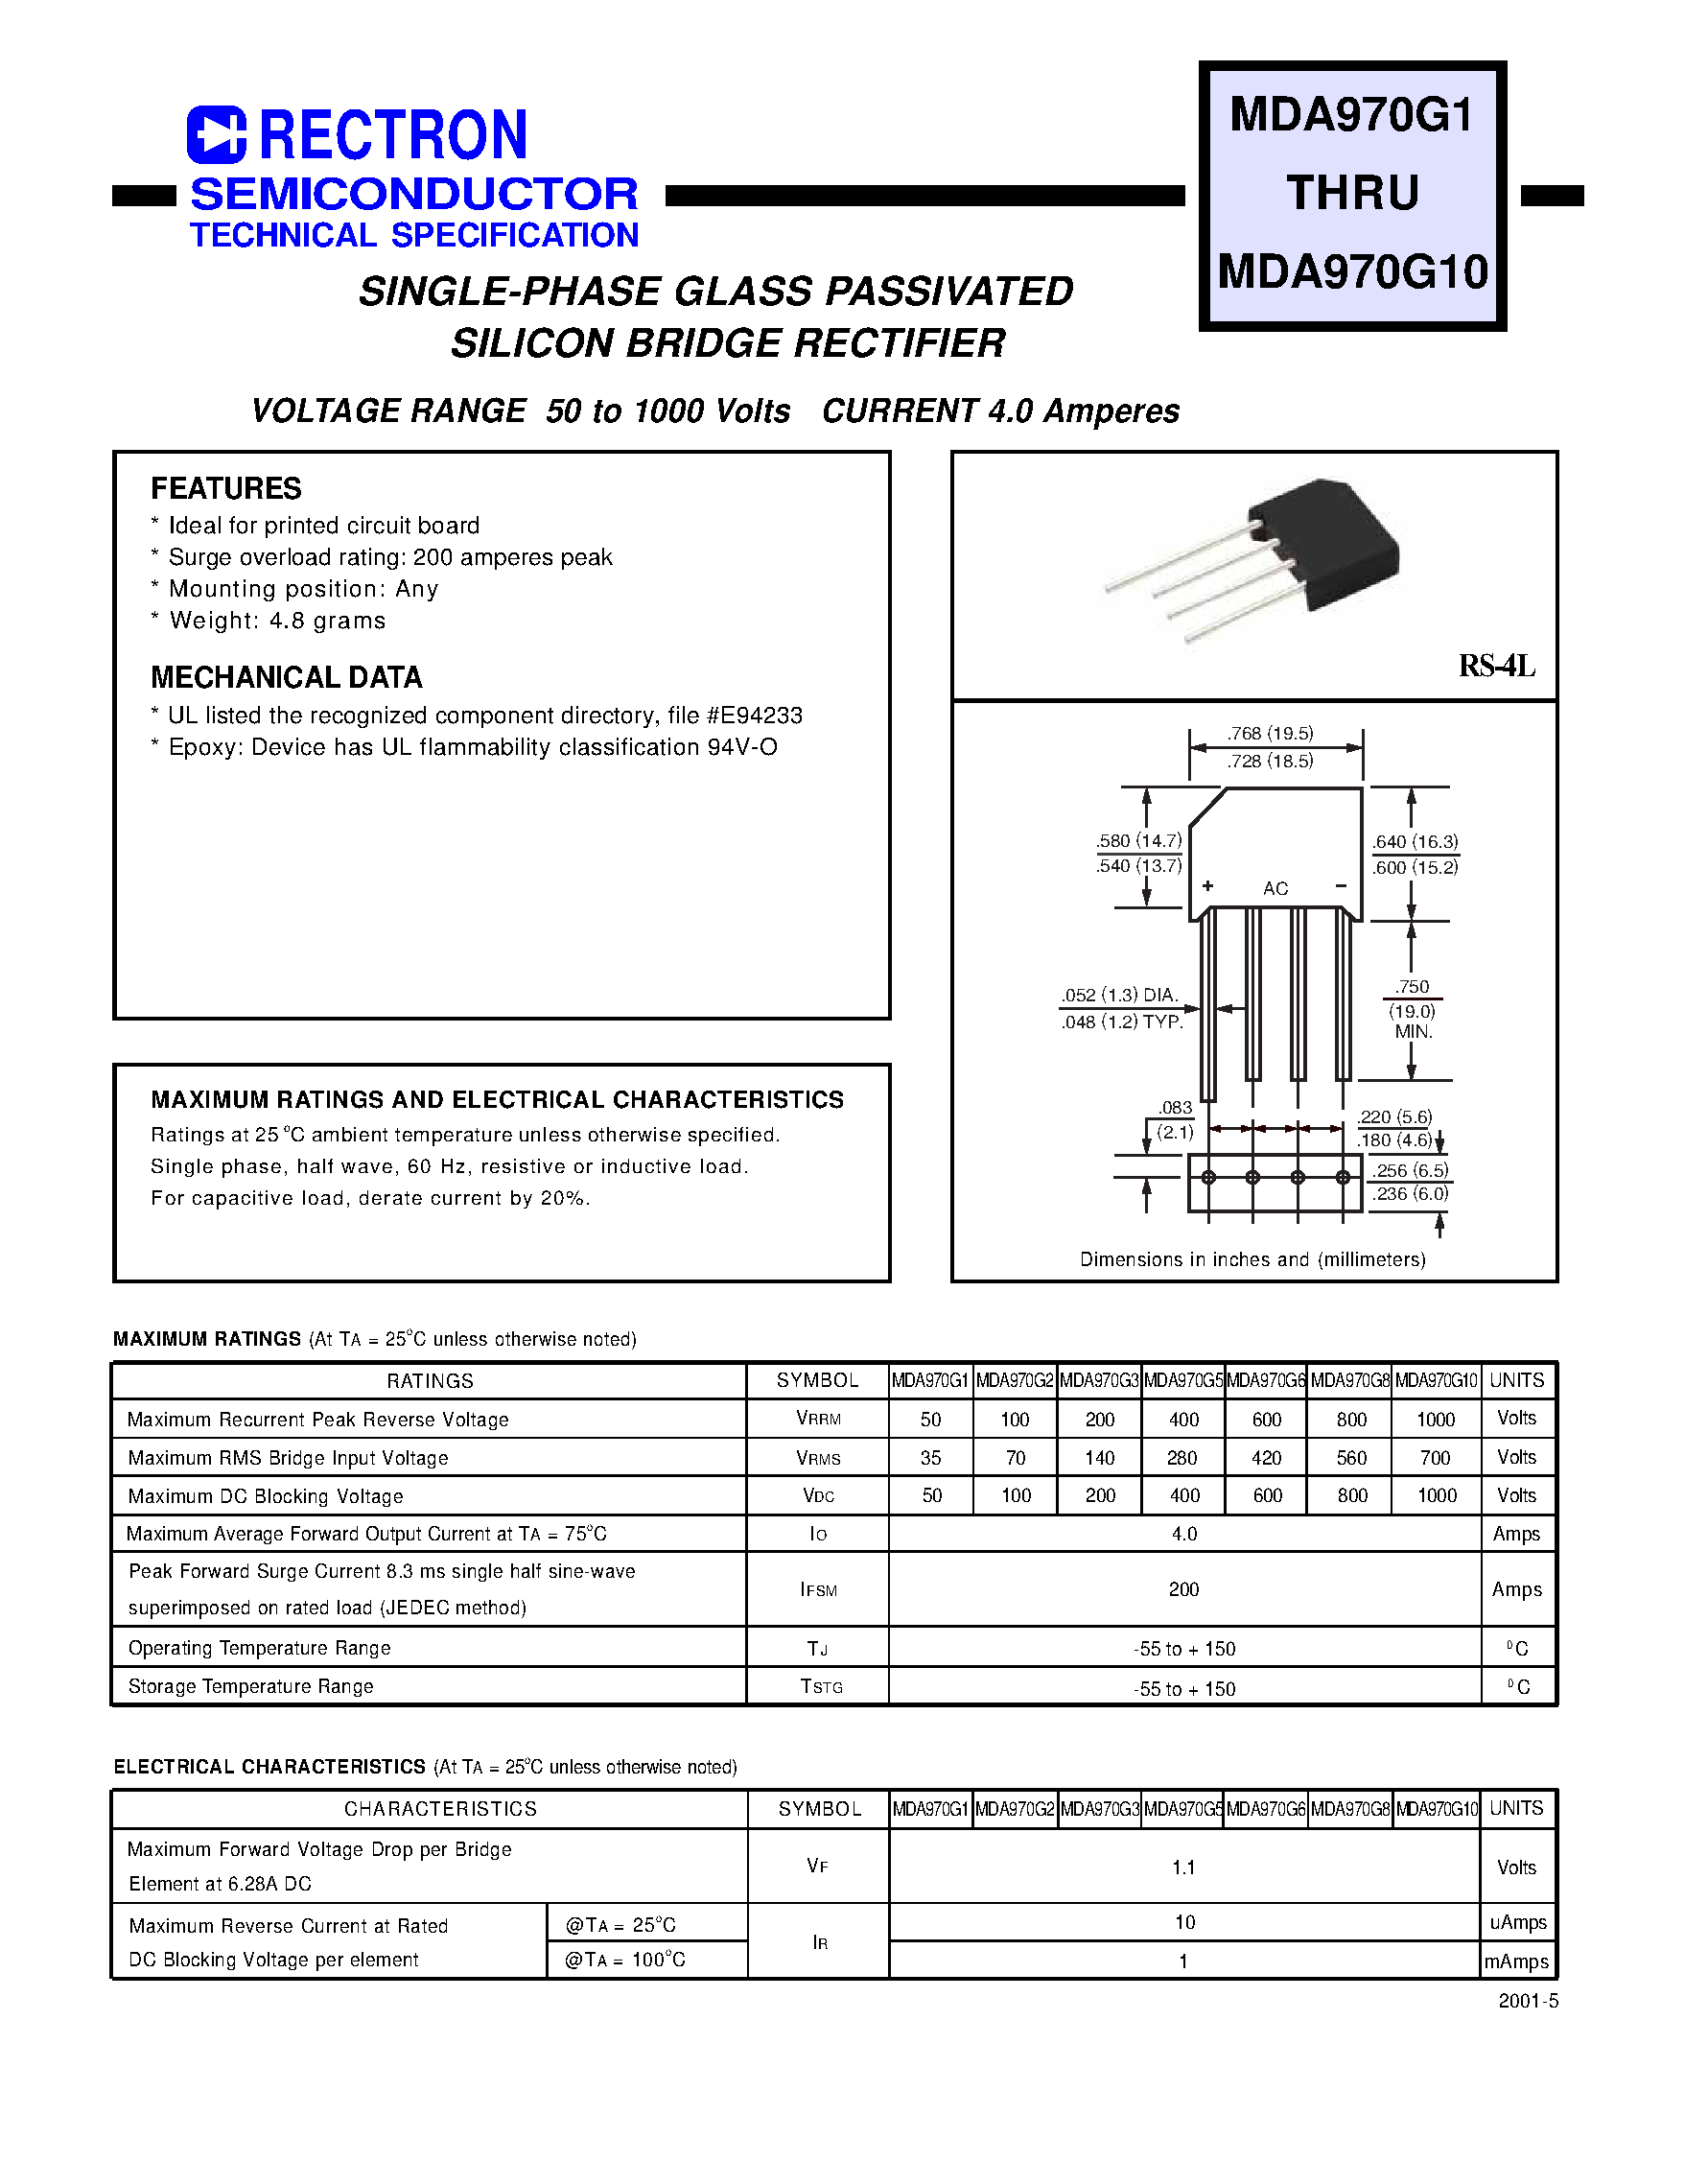 Datasheet MDA970G3 - SINGLE-PHASE GLASS PASSIVATED SILICON BRIDGE RECTIFIER (VOLTAGE RANGE 50 to 1000 Volts CURRENT 4.0 Amperes) page 1